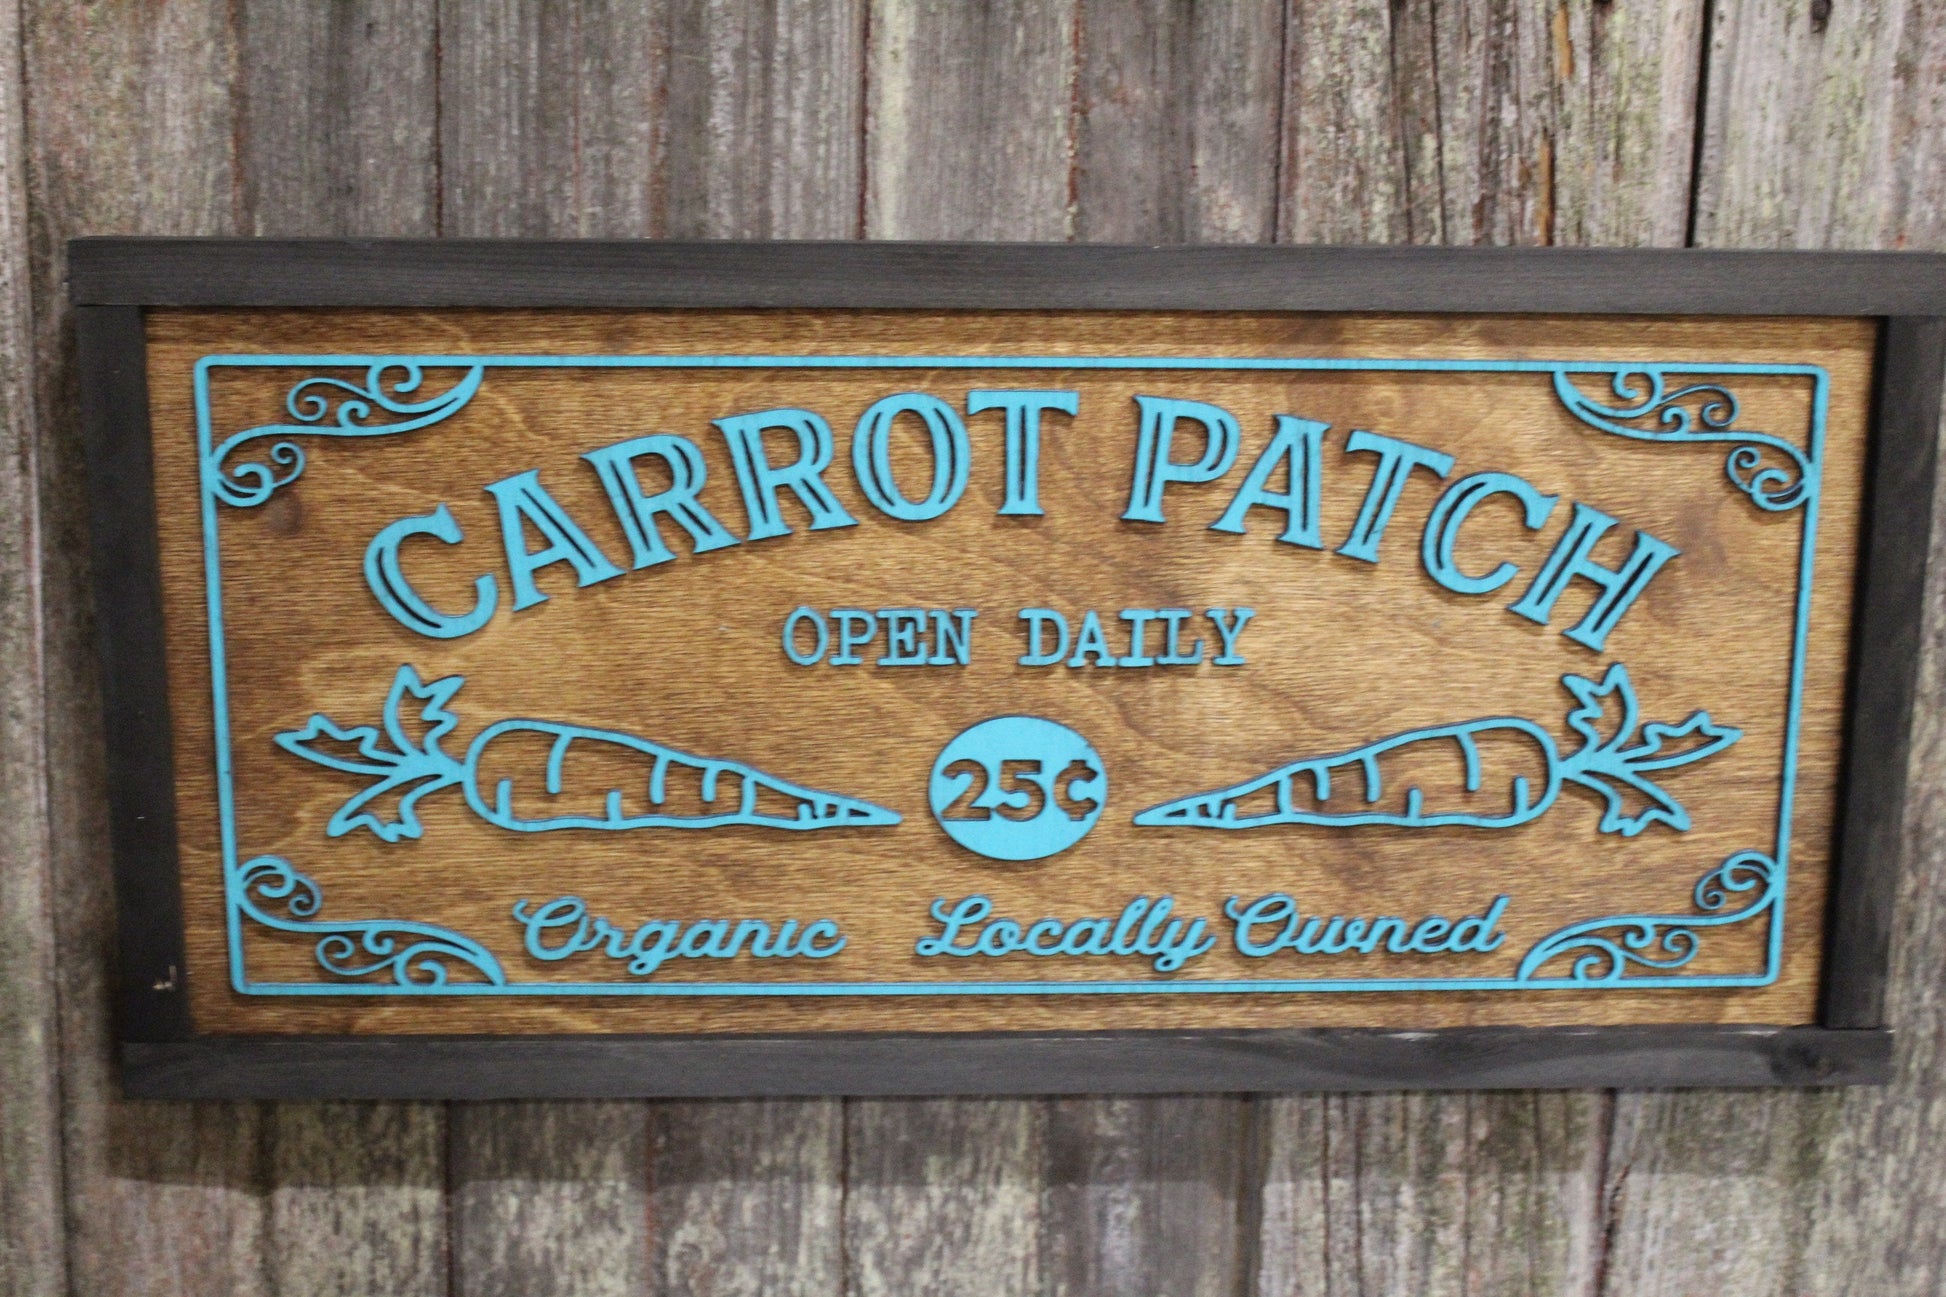 Carrot Patch Spring Sign 3D Raised Text Easter Rabbit Bunnies Open Daily Organic Locally Grown Framed Teal Brown Handmade Rustic Primitive